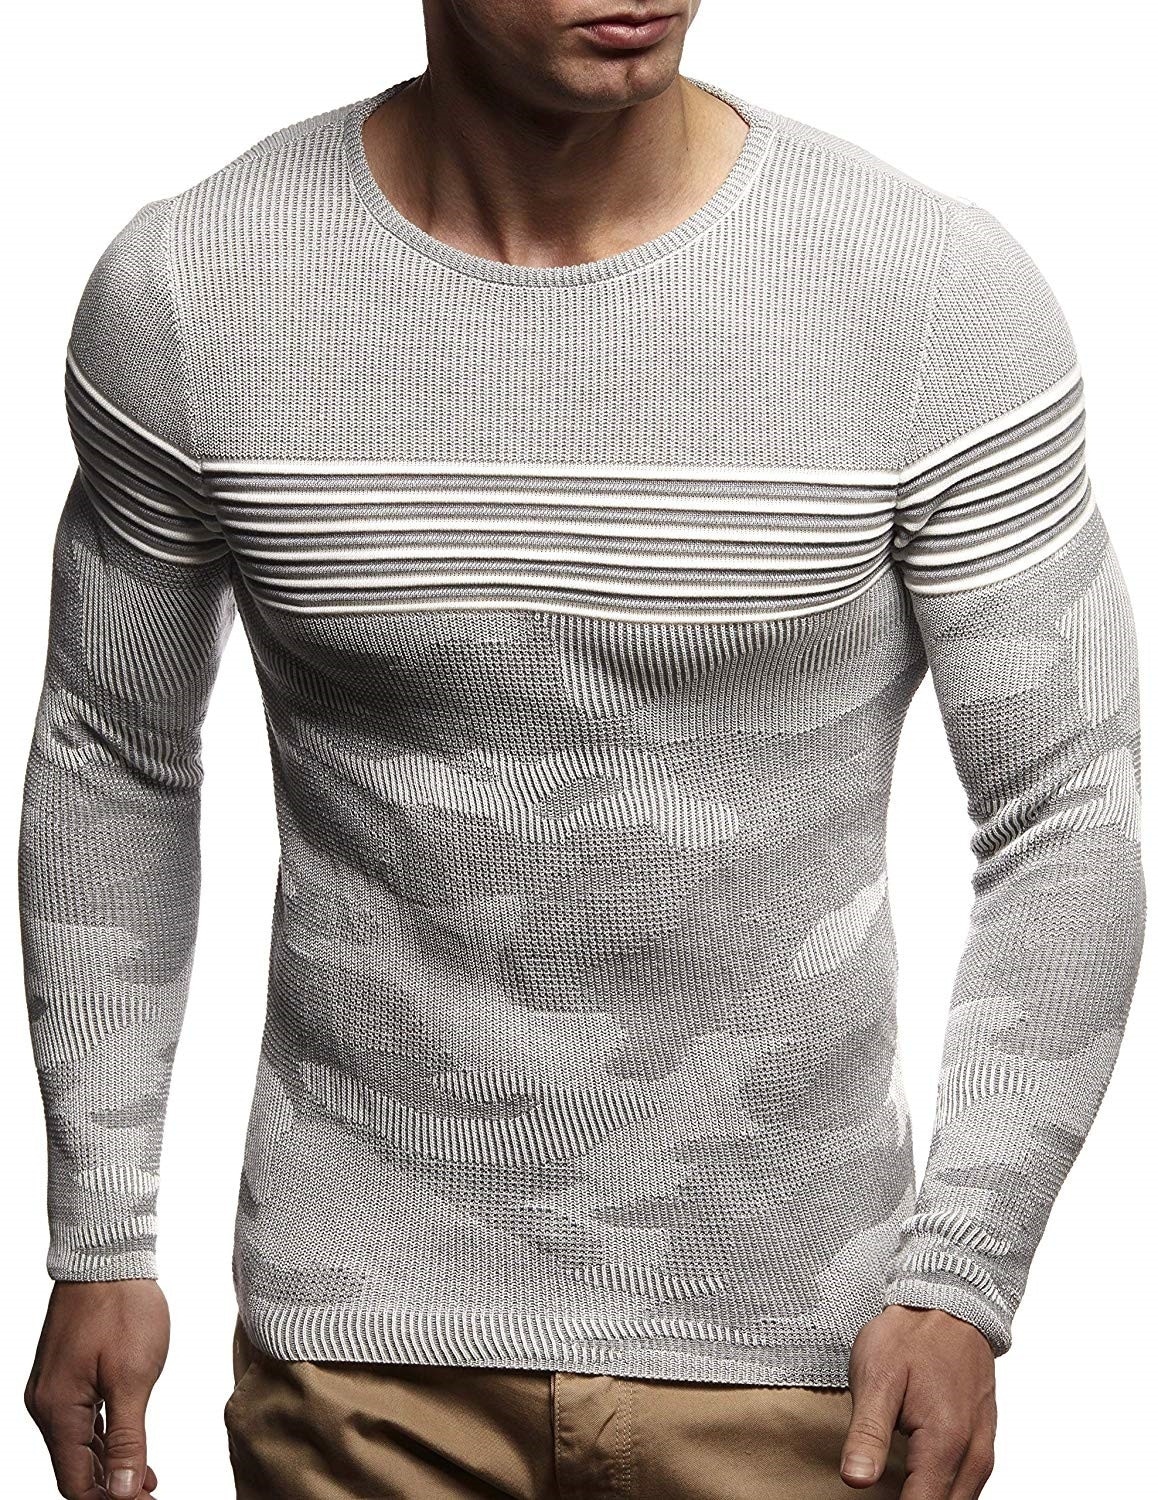 LEIF NELSON Men's Knit Sweater | Knitted Pullover With Round Collar ...